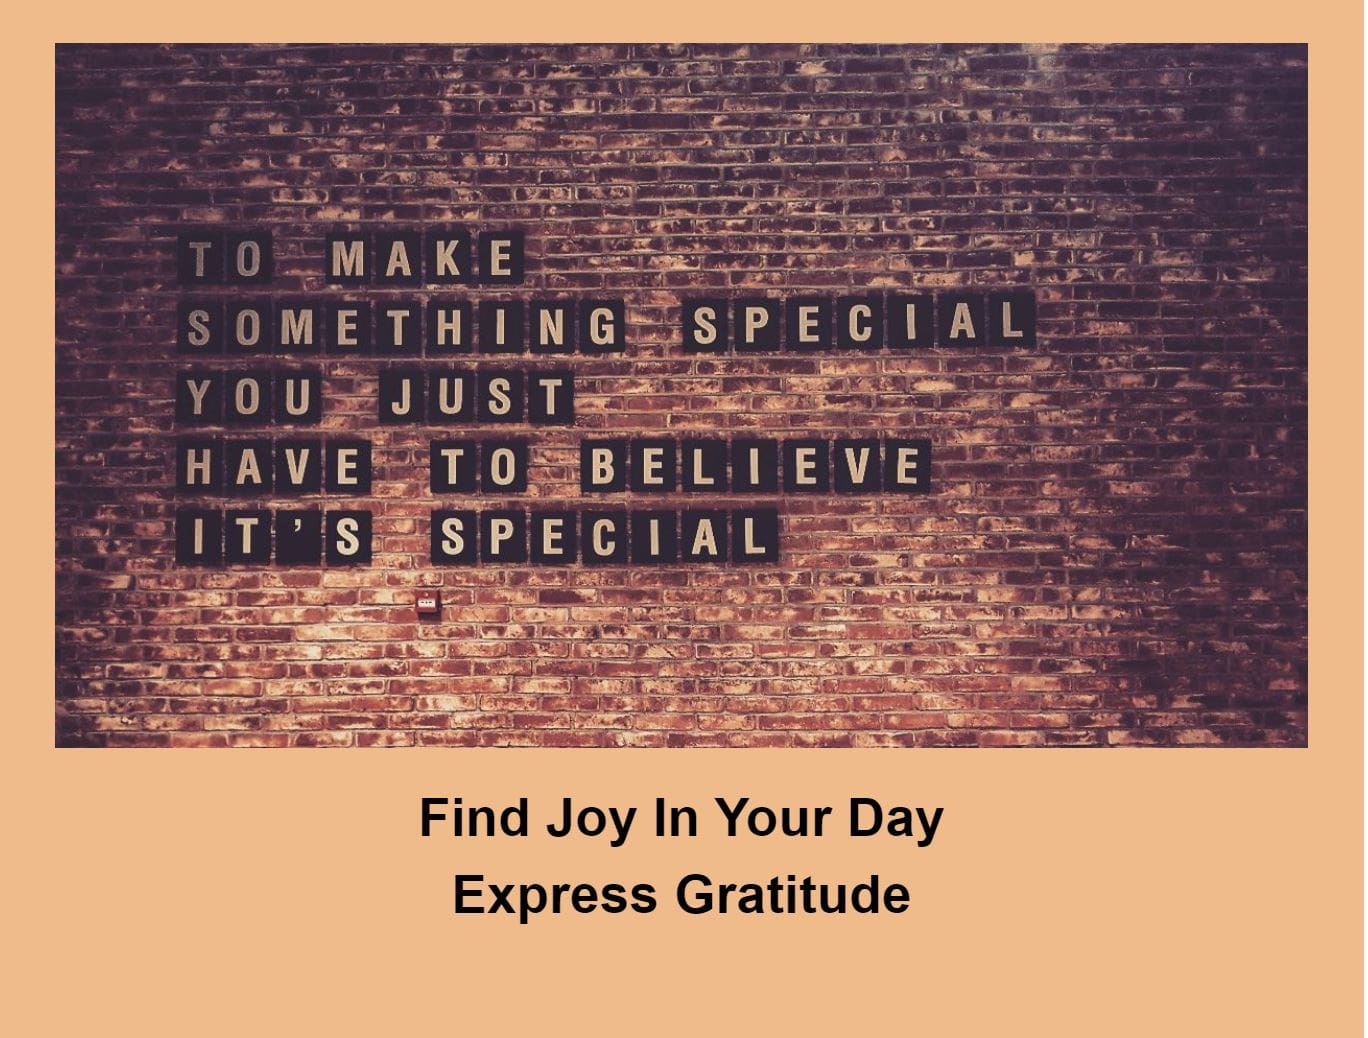 A poster on Find Joy in your day express gratitude